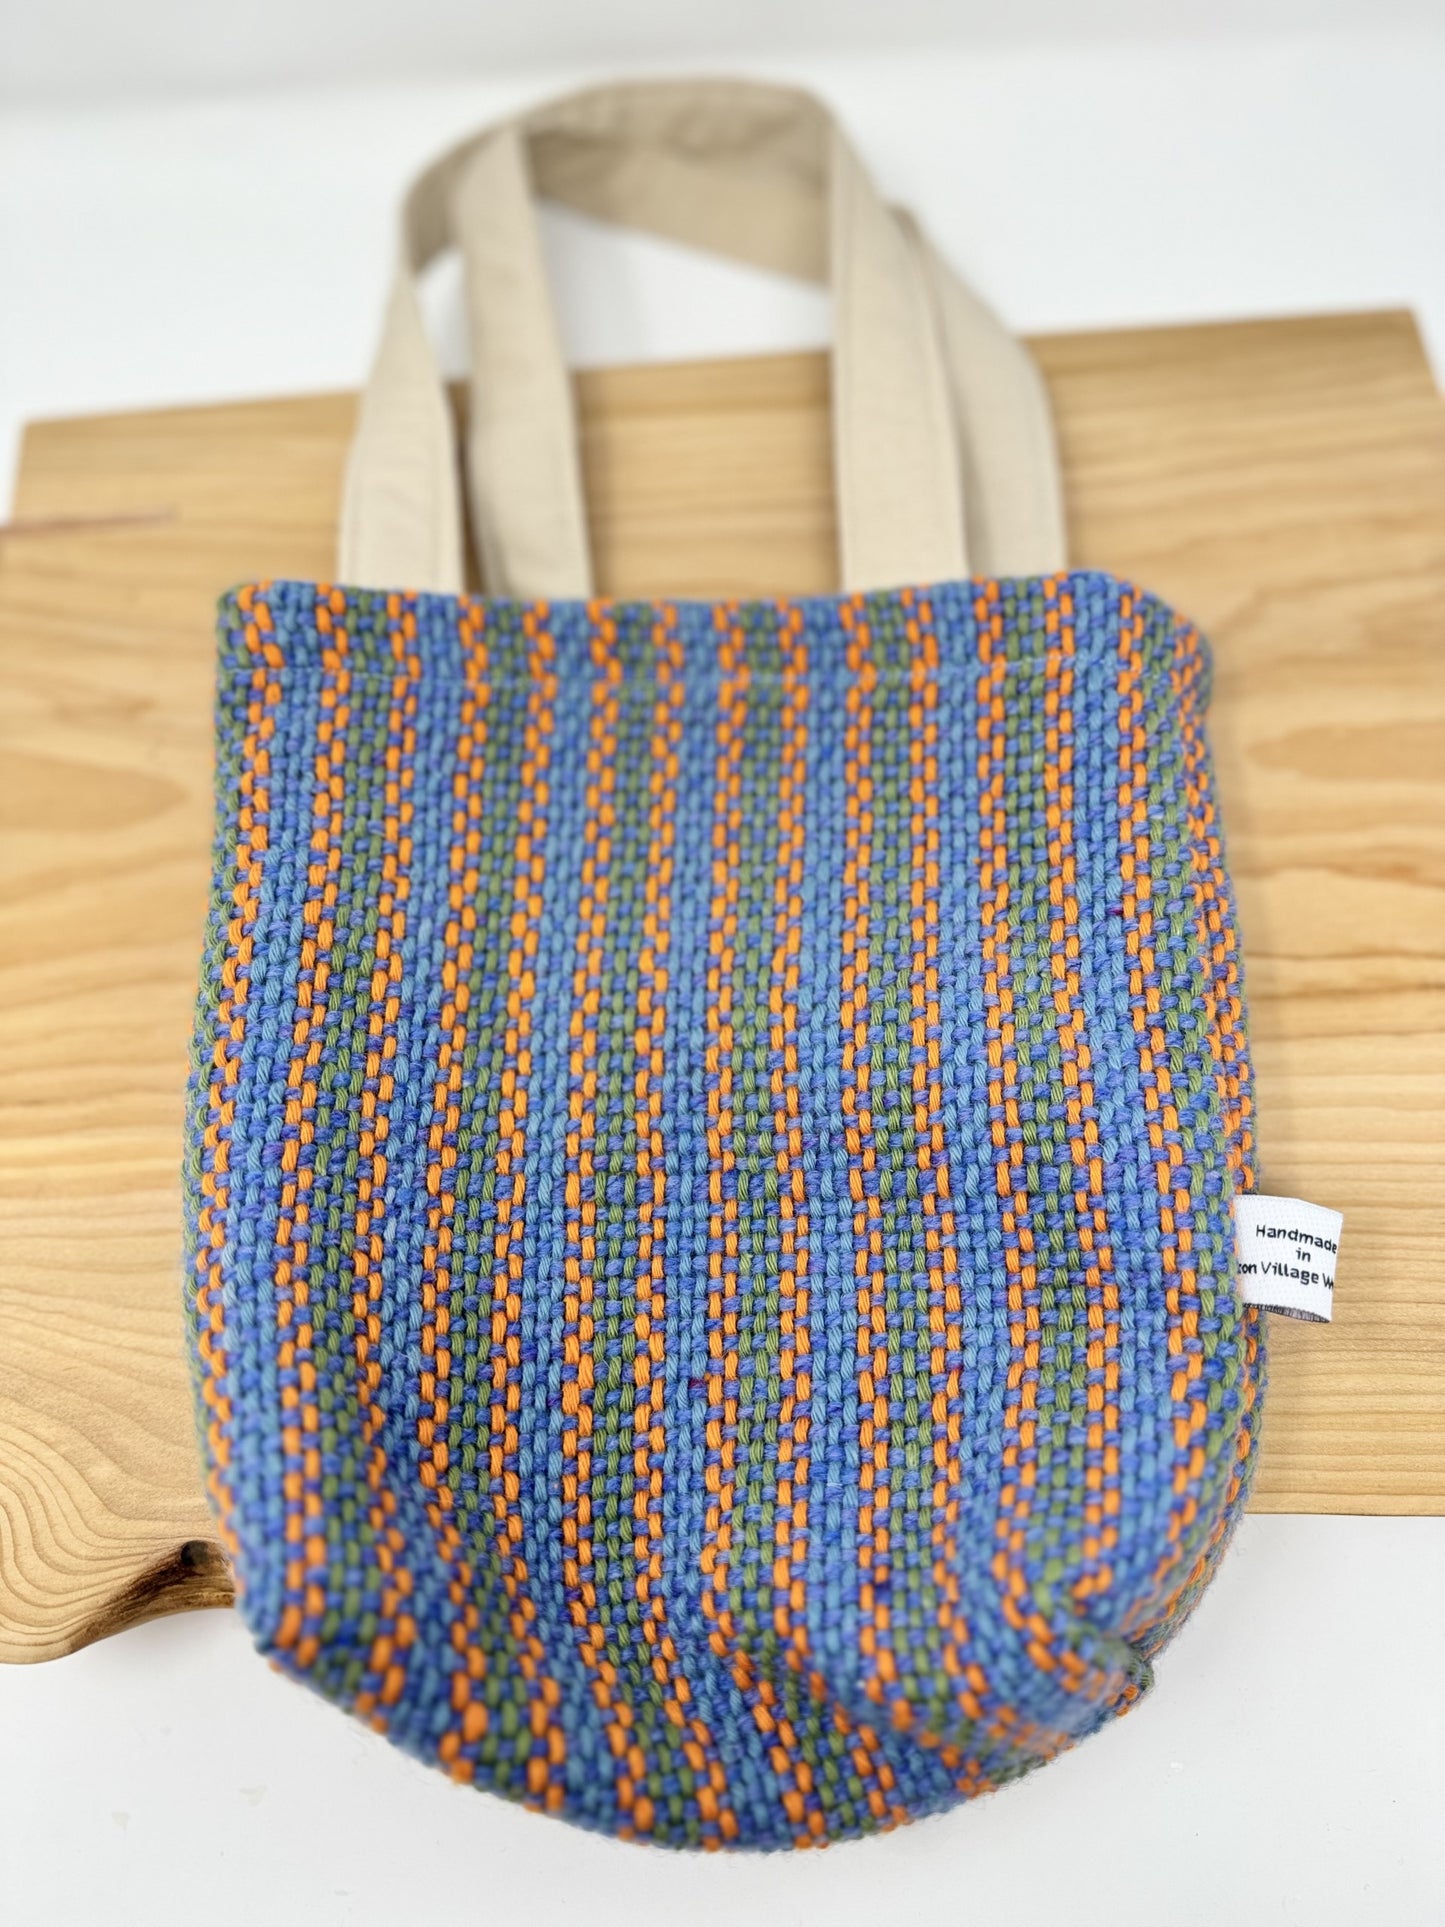 Hand Woven Lined Bag